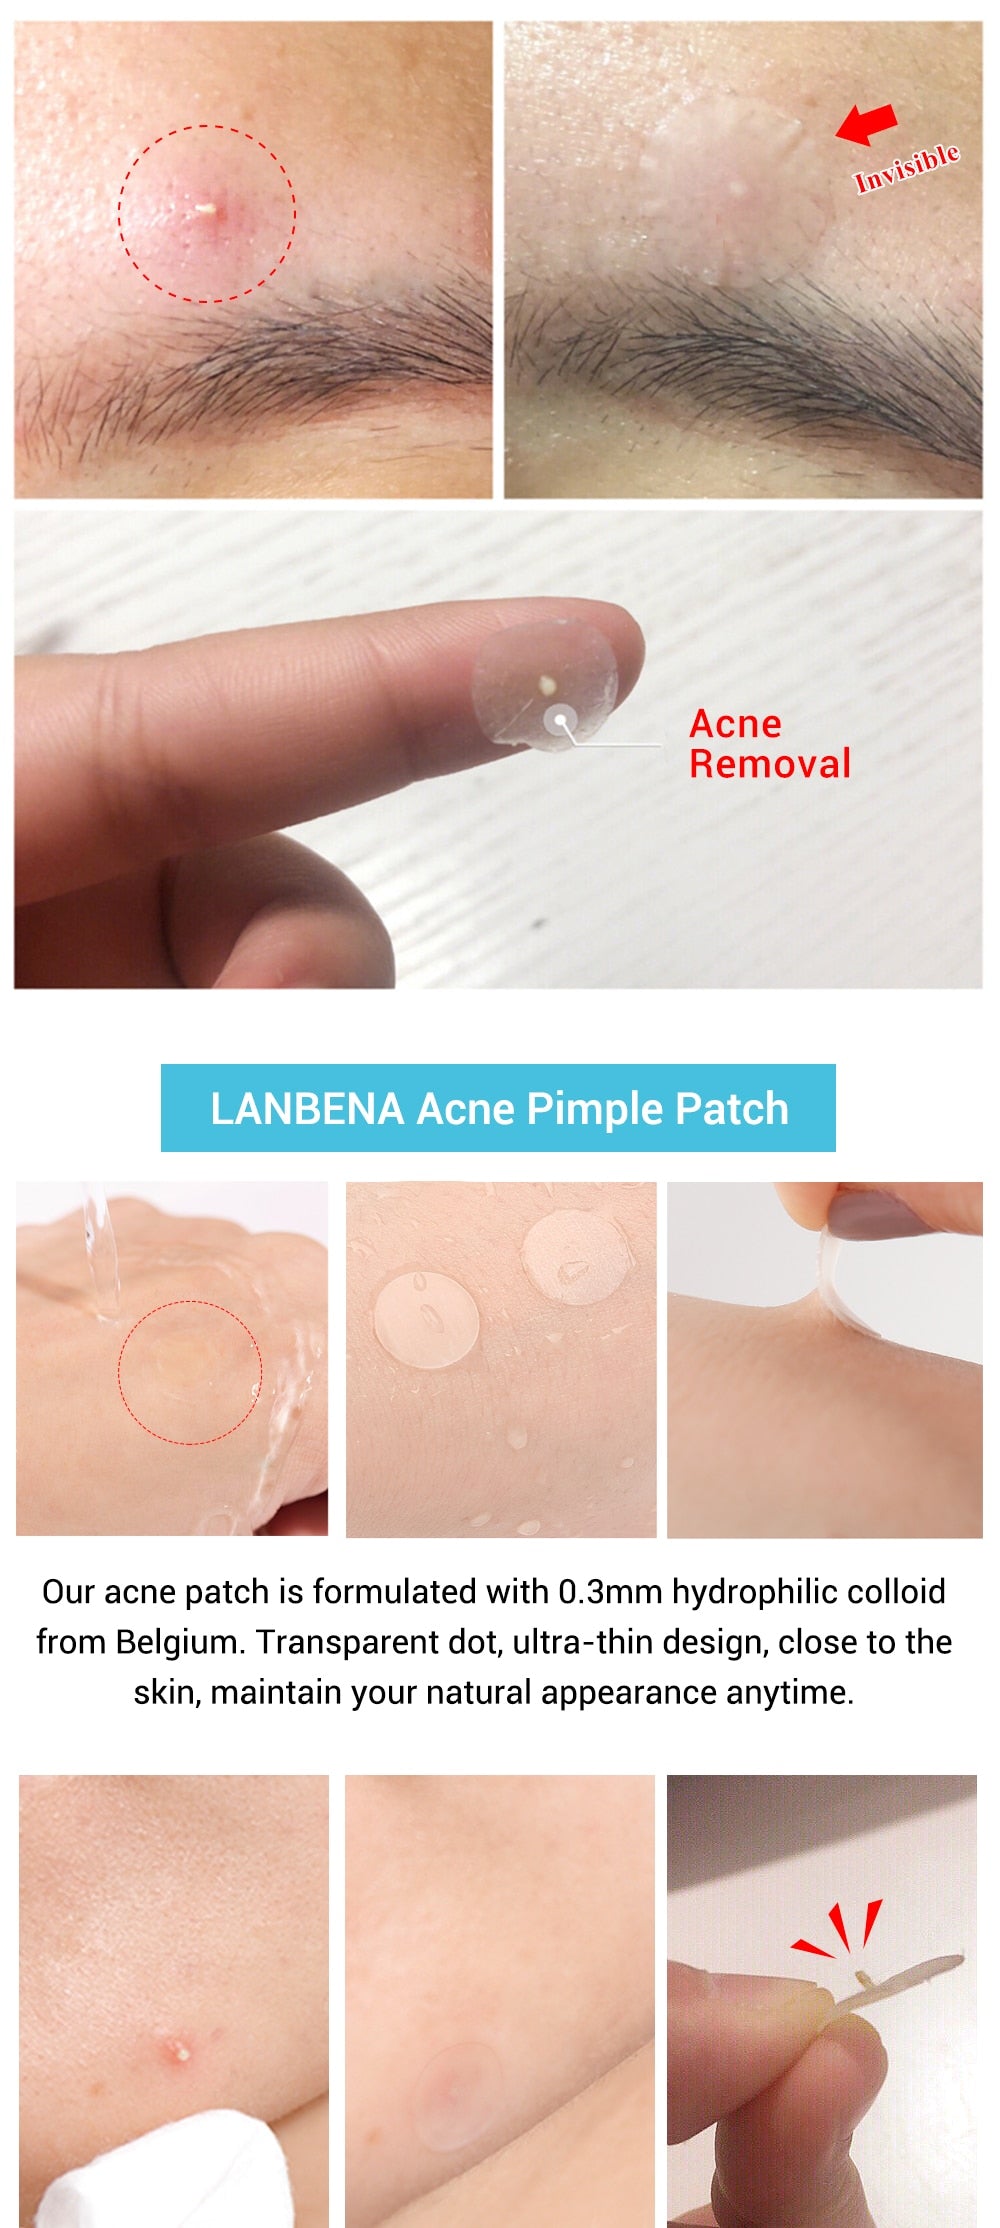 Acne Pimple Patch Face Mask 28pcs Invisible Acne Stickers Blemish Treatment Pimple Remover Tool Skin Care Face Cream